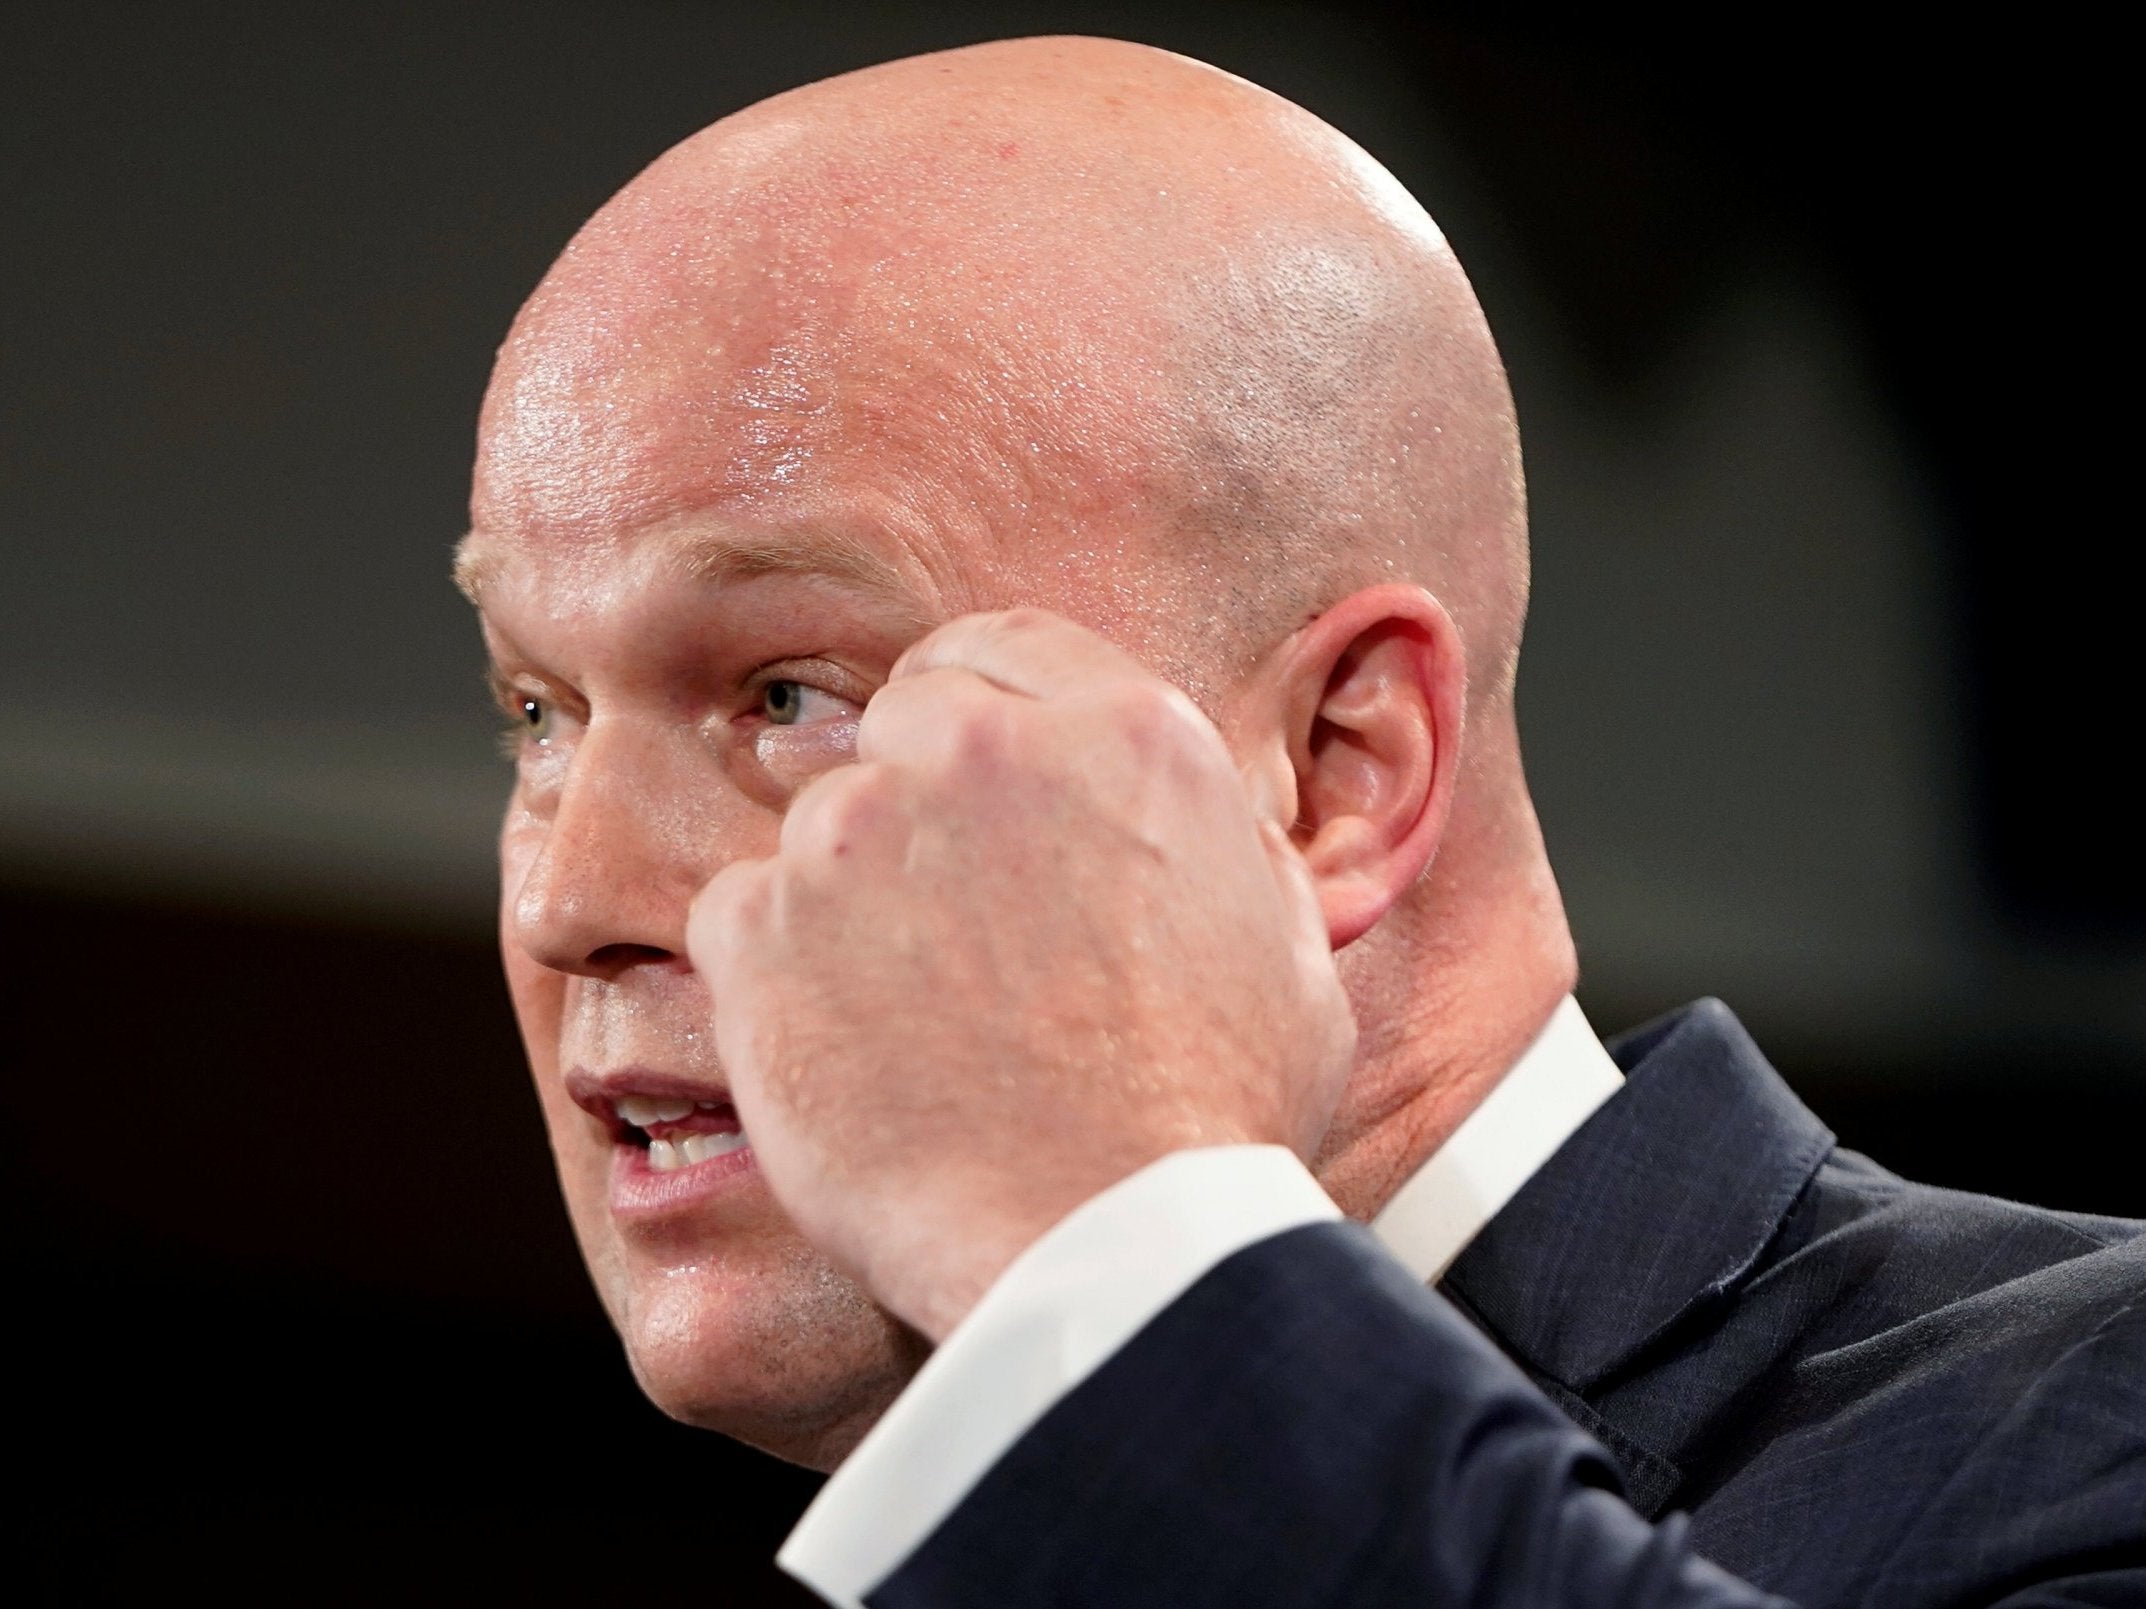 Acting Attorney General Matthew Whitakers said: 'China should be concerned about criminal activities by Chinese companies.'